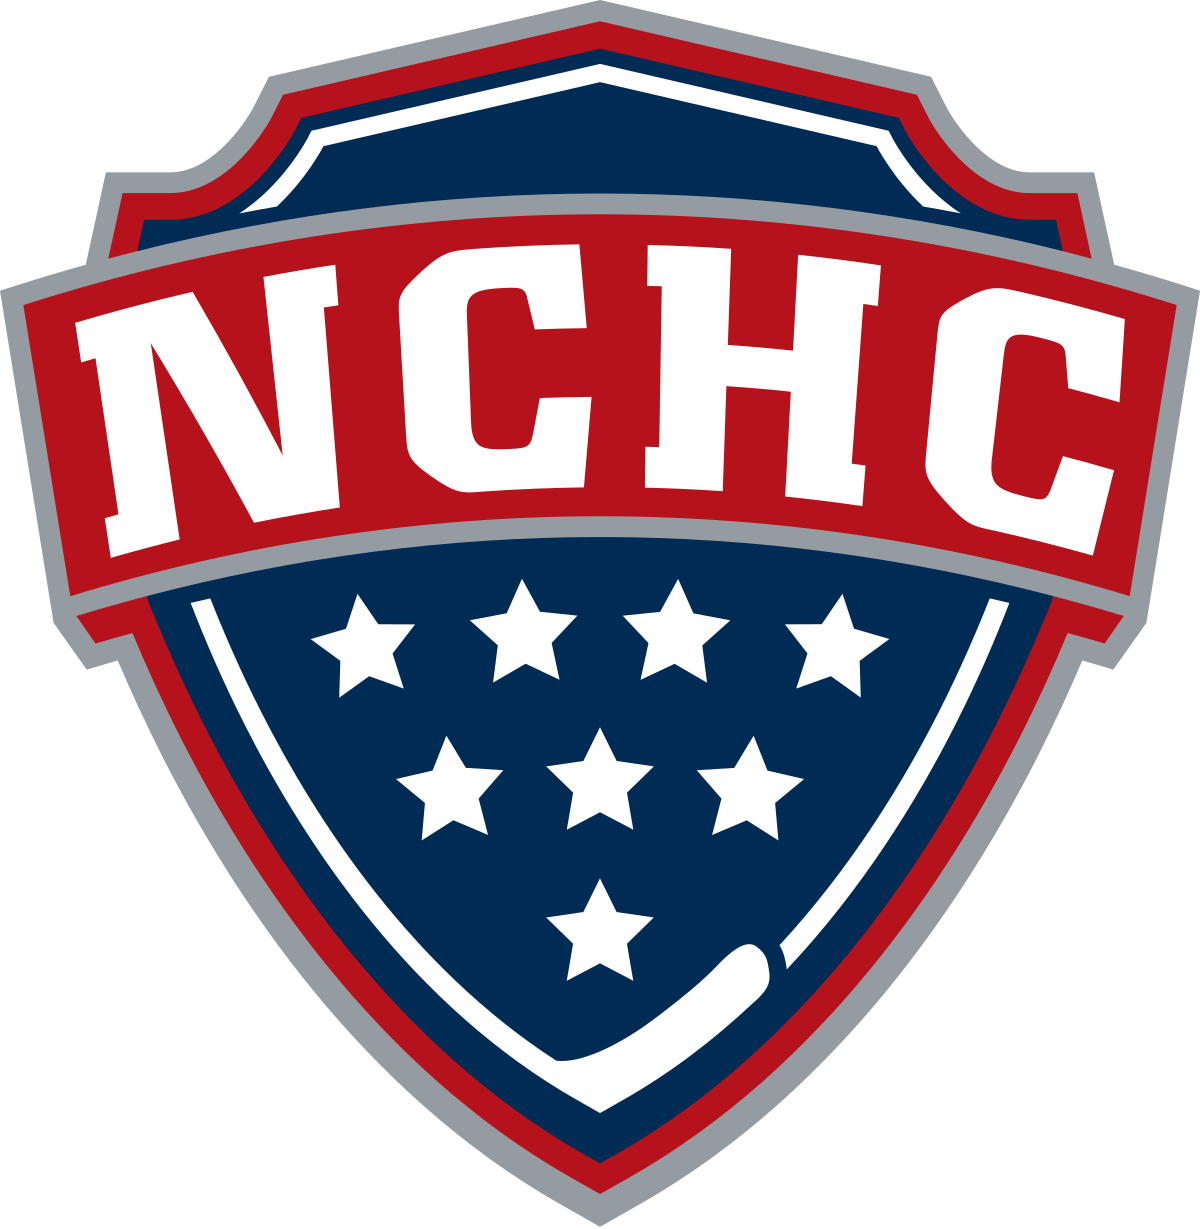 NCHC tourney to move from St. Paul starting in 2026